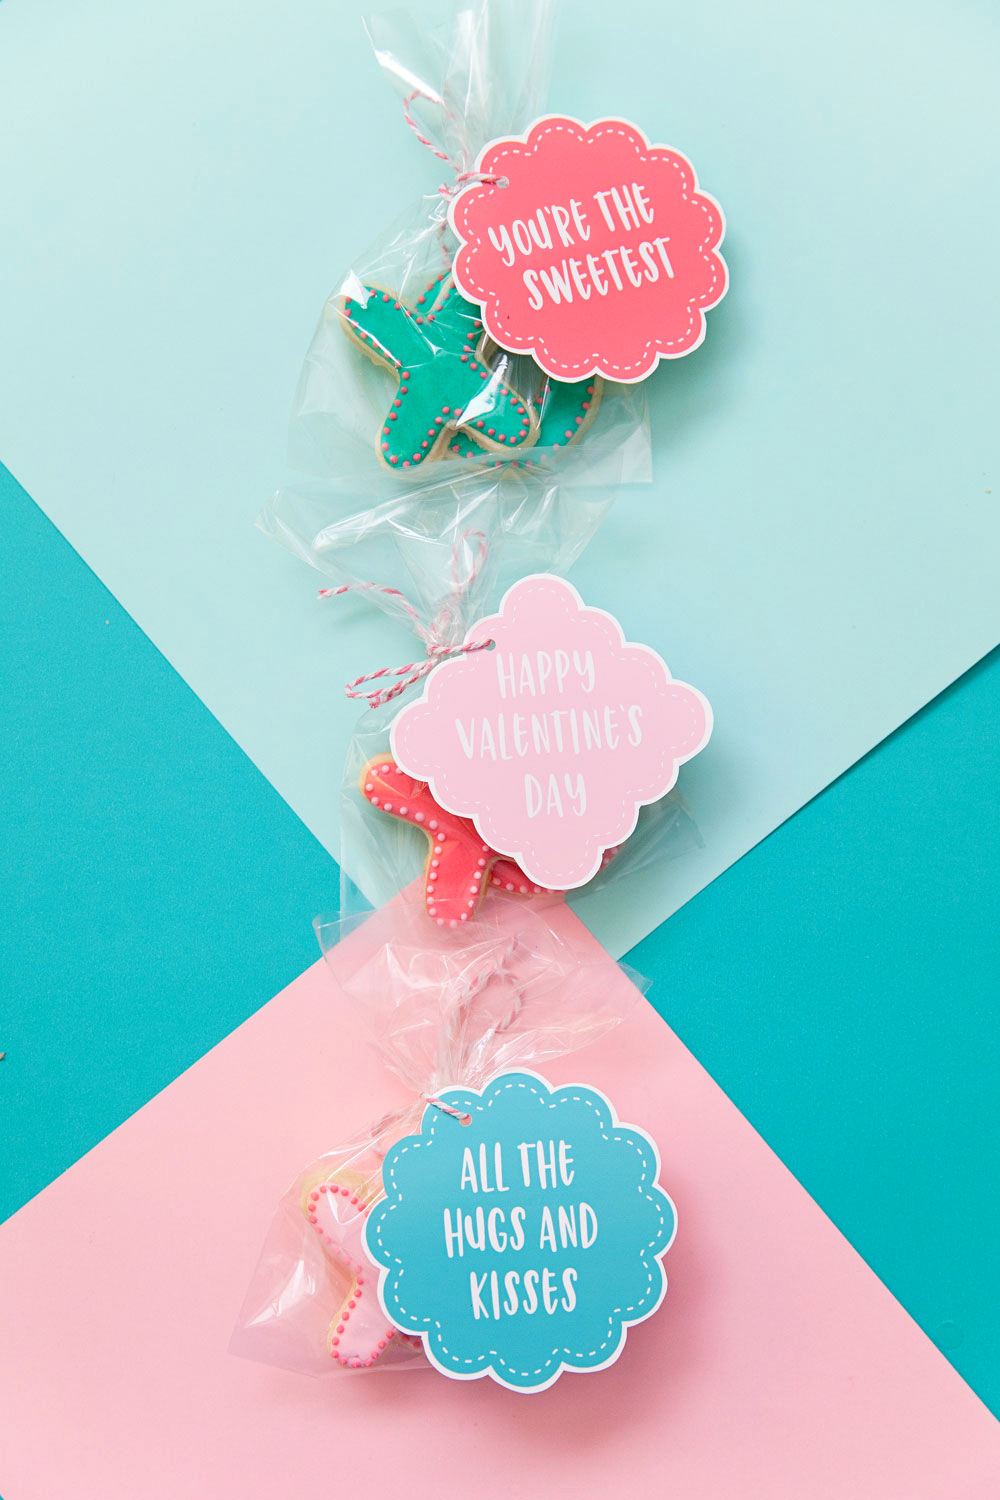 These free printable Valentine's are perfect for any cookie for treat!  Valentine's day, DIY, Cookies